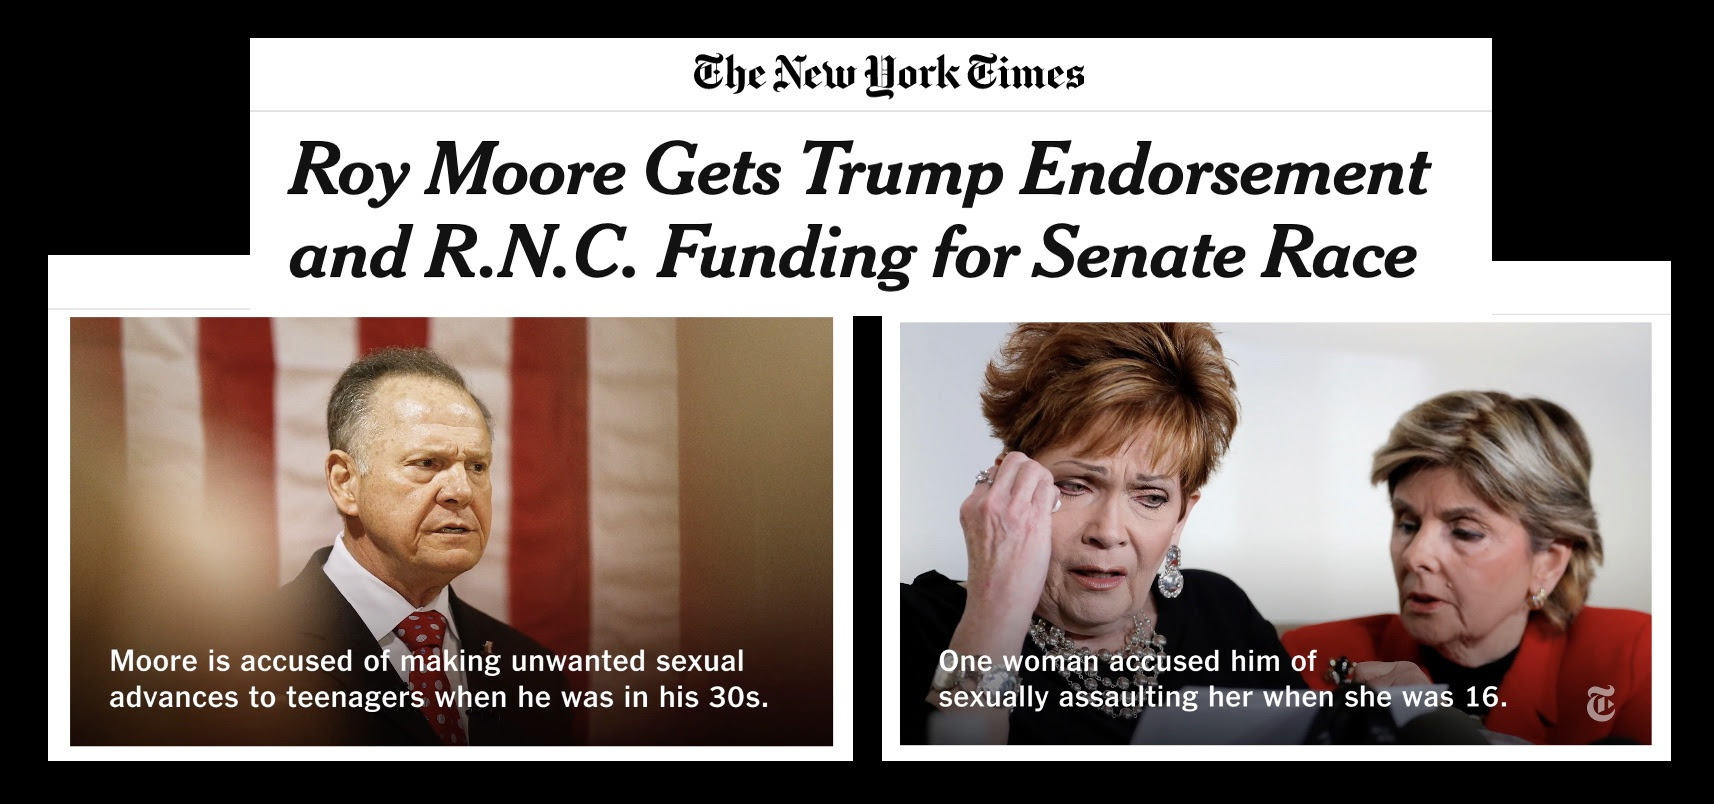 The Republican War on Women 2022. Republicans endorse Roy Moore despite accusations of sexual assaults of minors. 